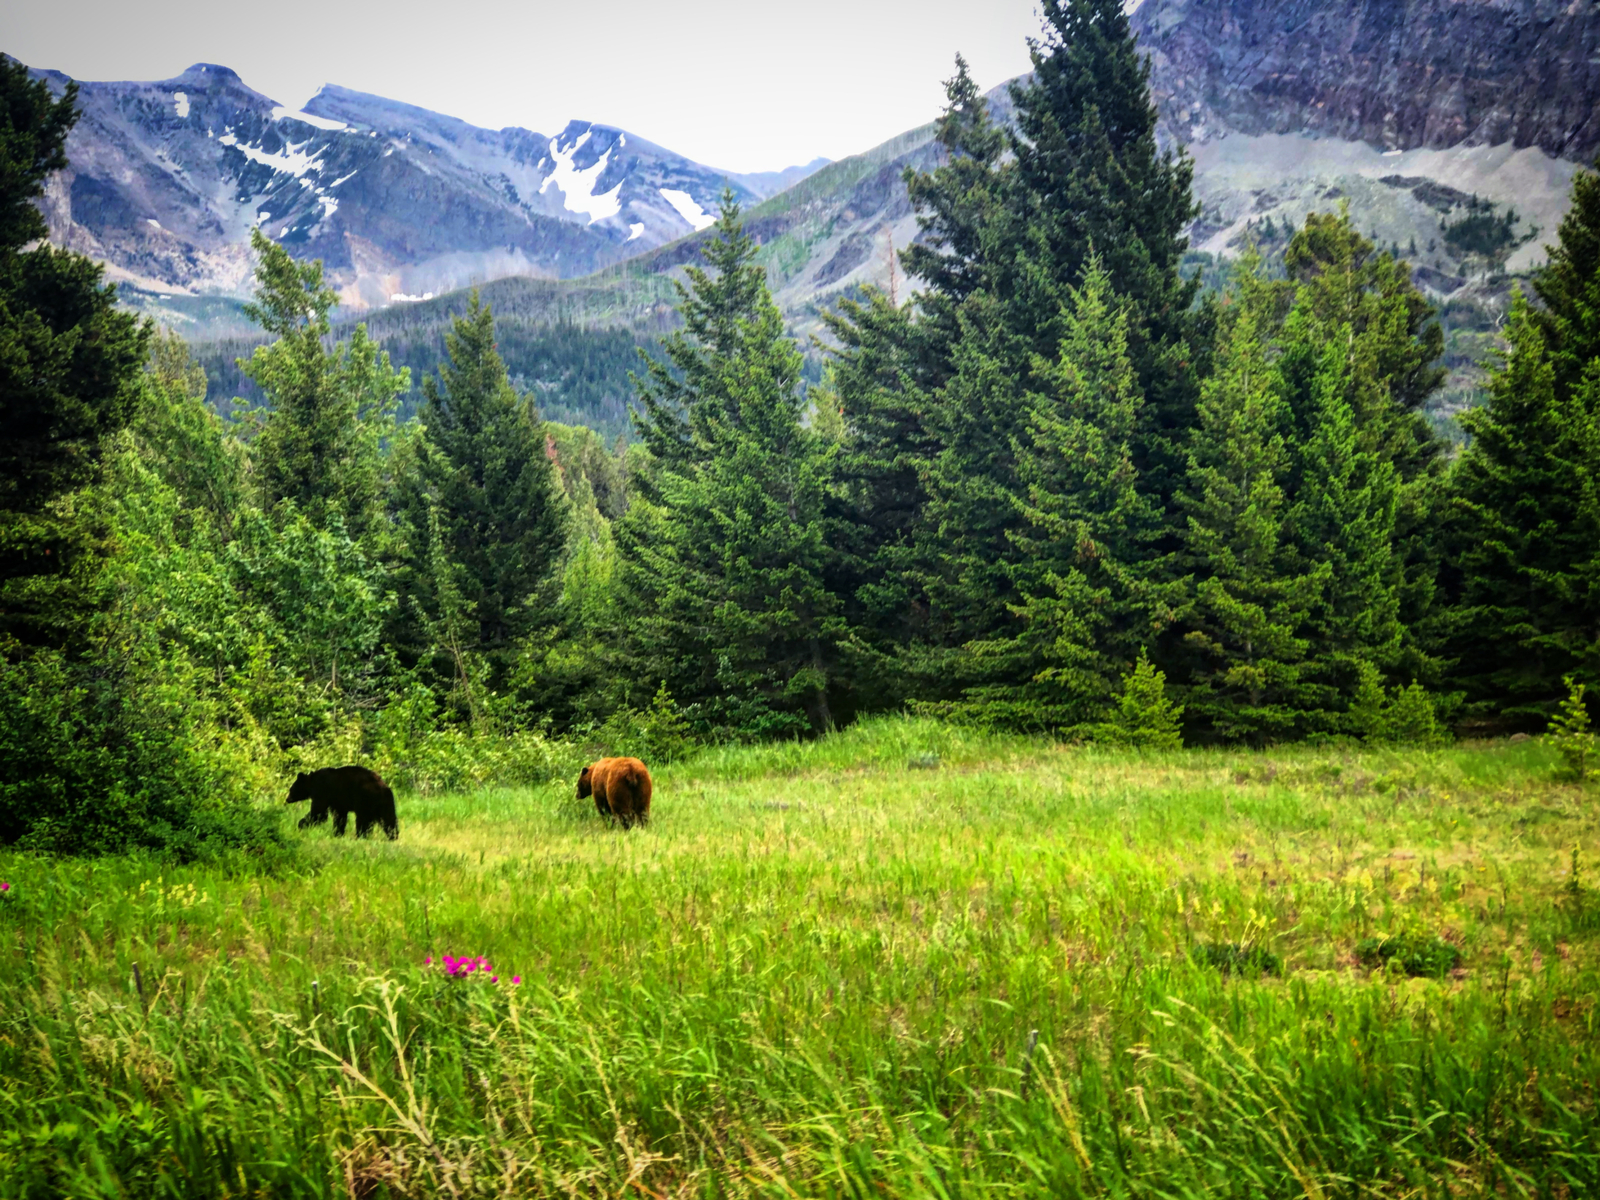 Bears in a national park, one of the best things to do in Montana